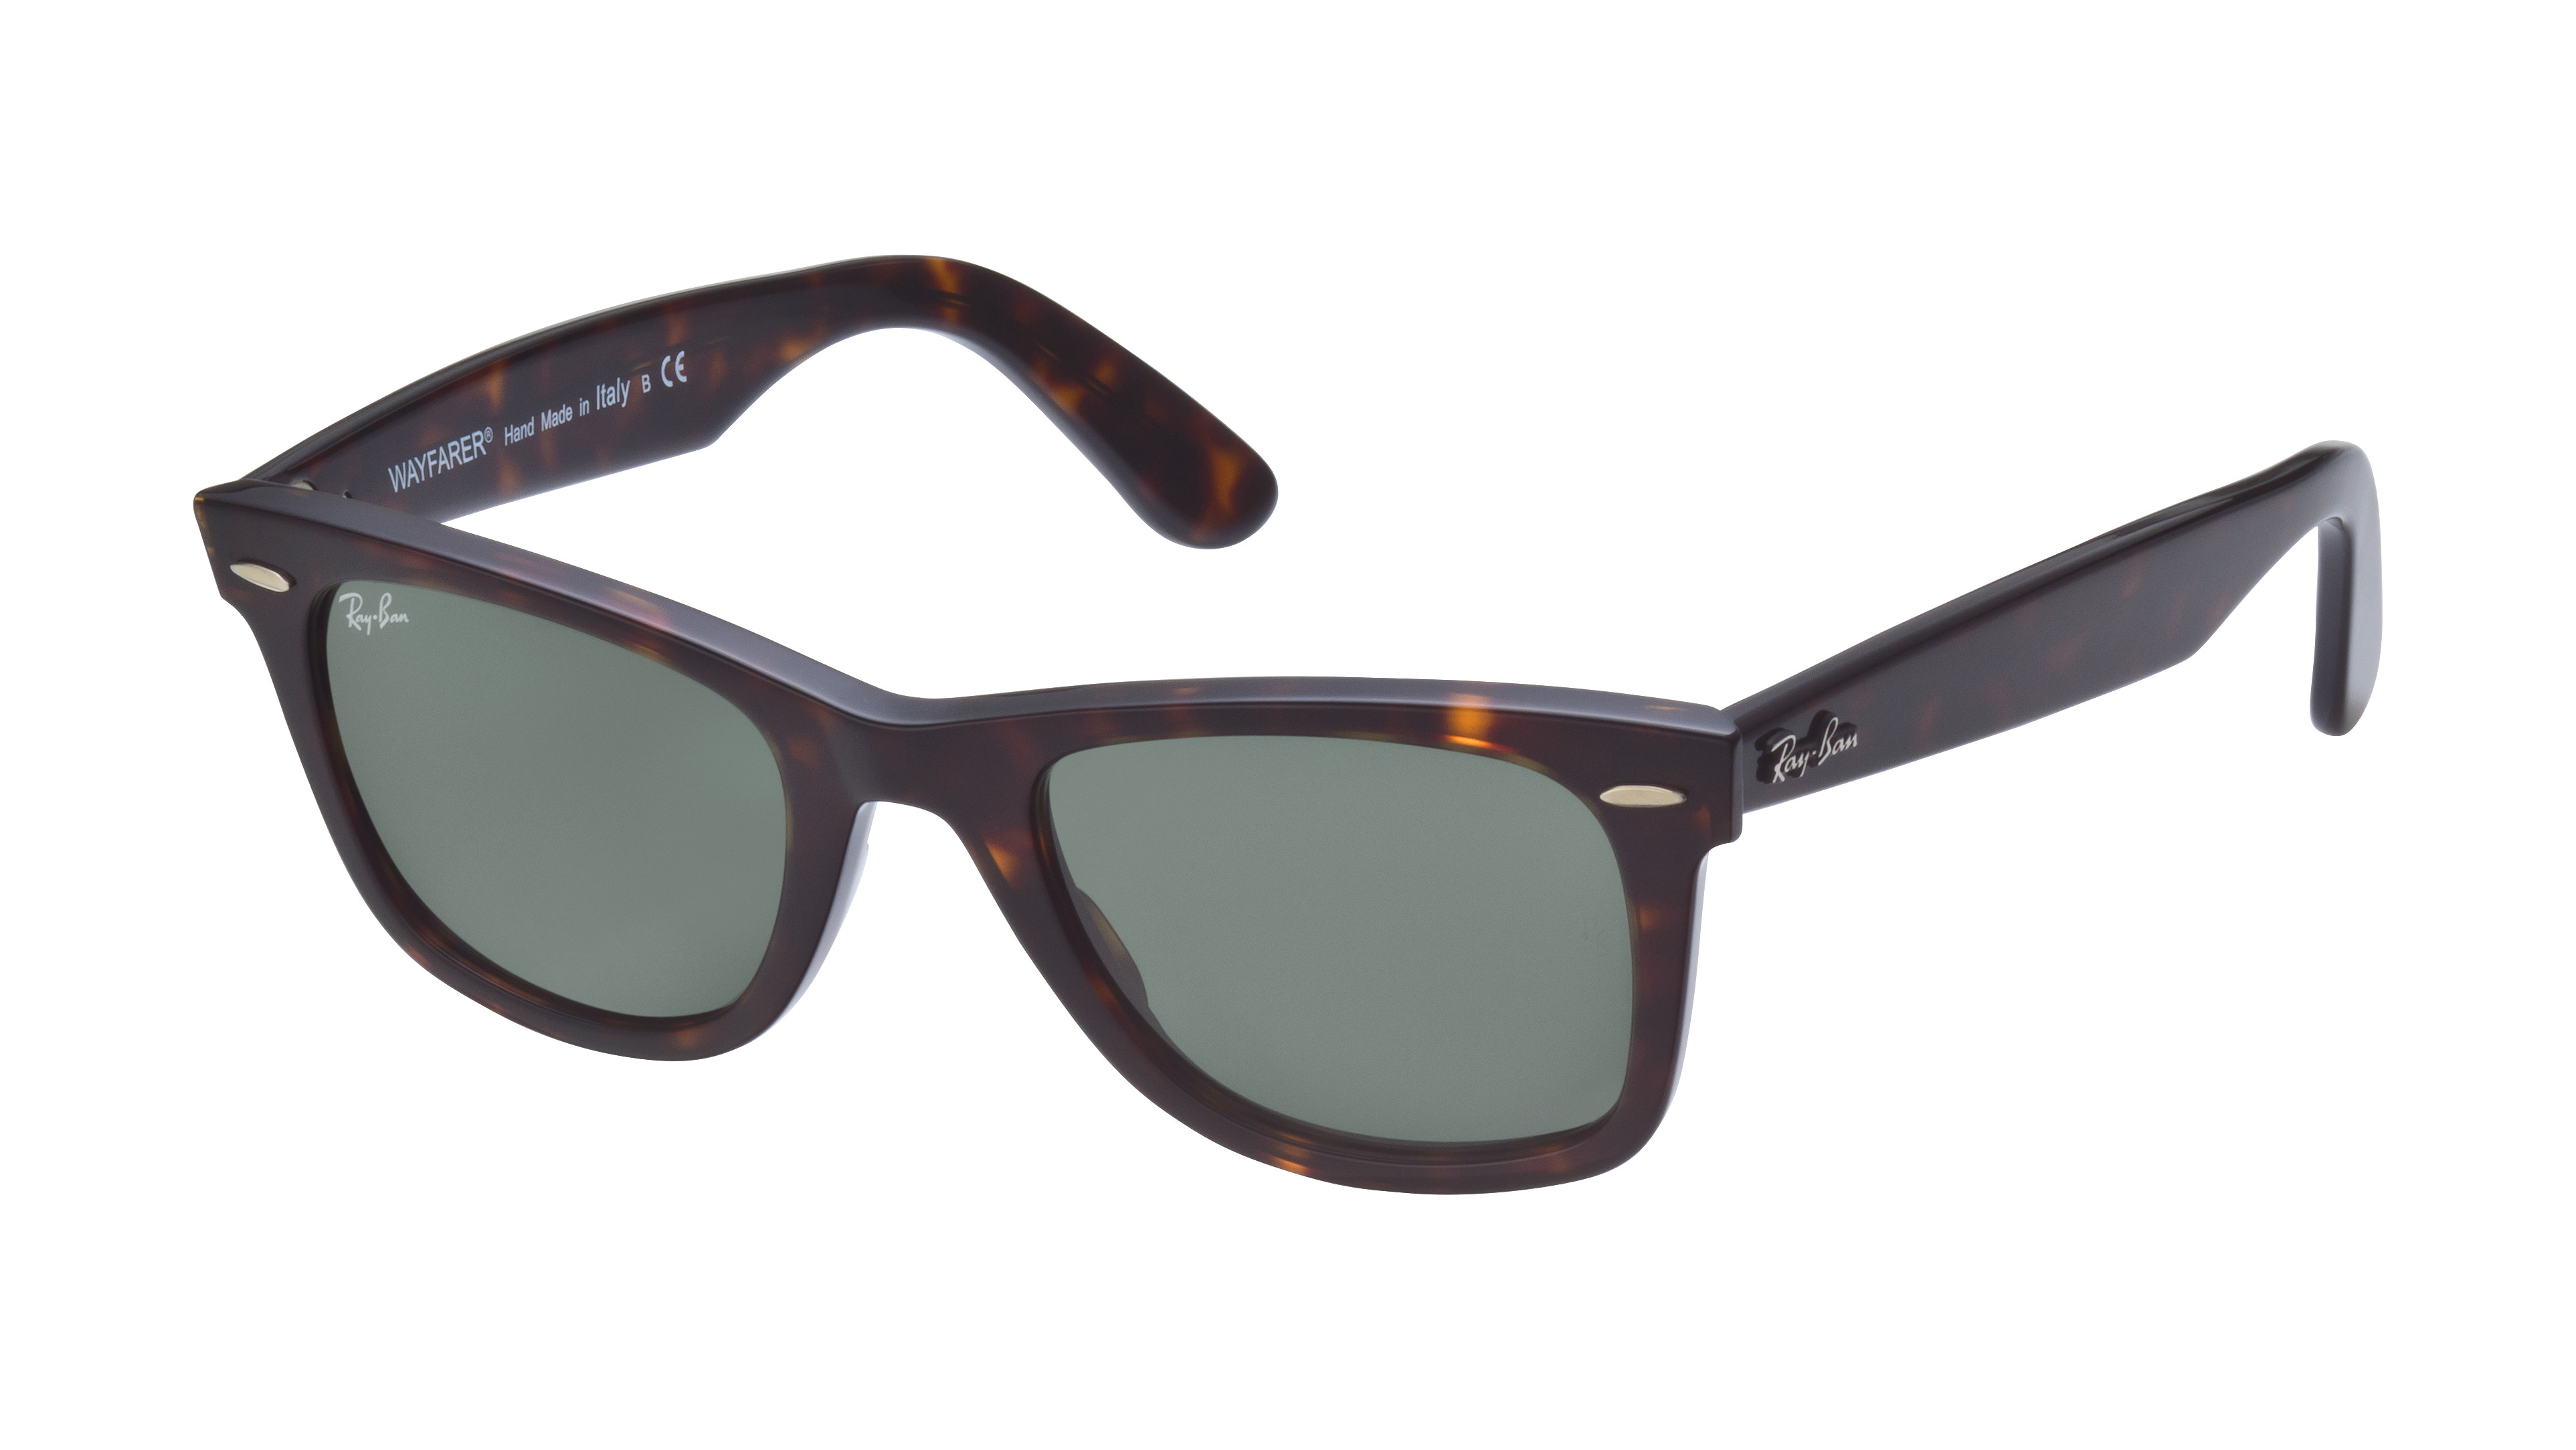 [products.image.angle_left01] Ray-Ban Wayfarer 0RB2140 902 Sonnenbrille